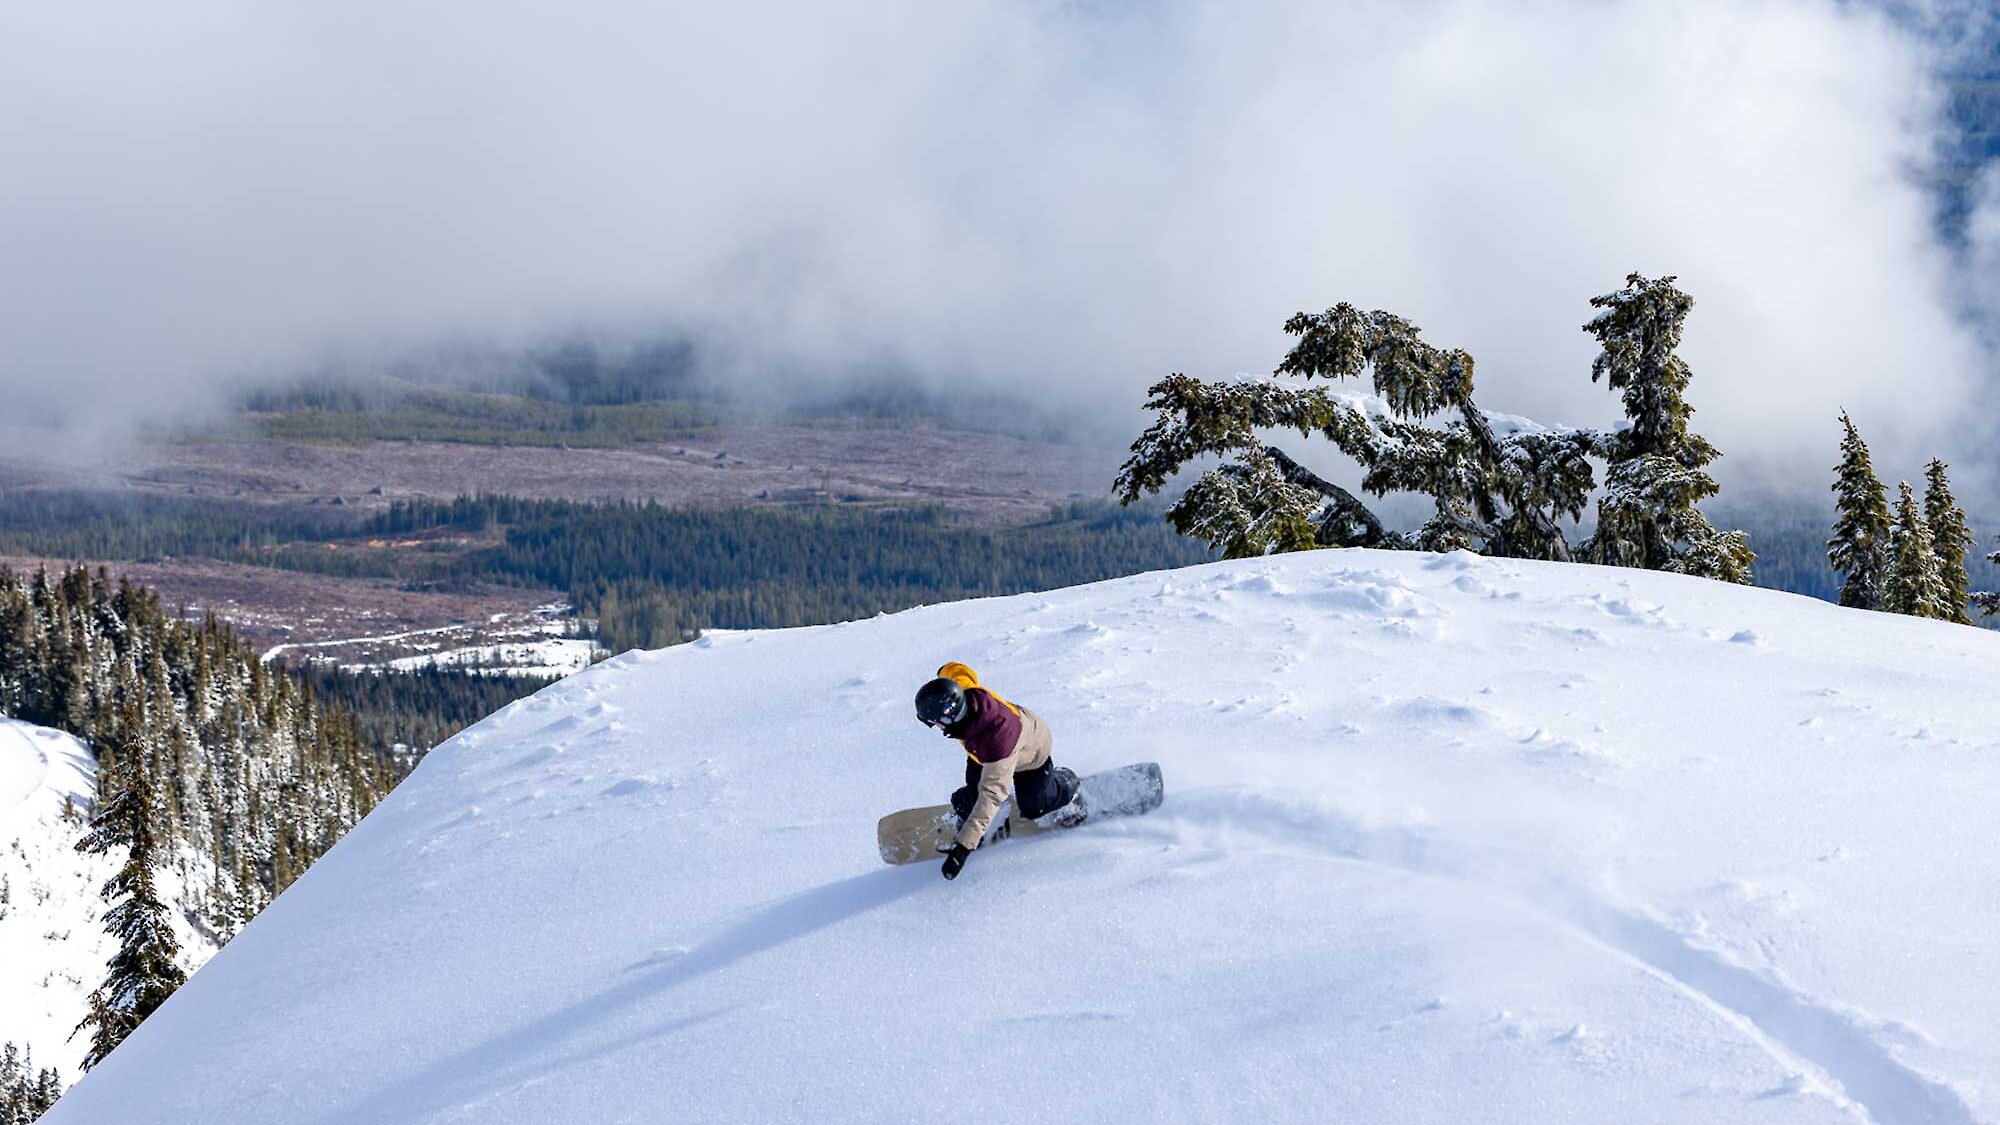 A snowboarder heads down Mount Washington on a blue and cloudy sky, with a clear view of the Comox Valley below.